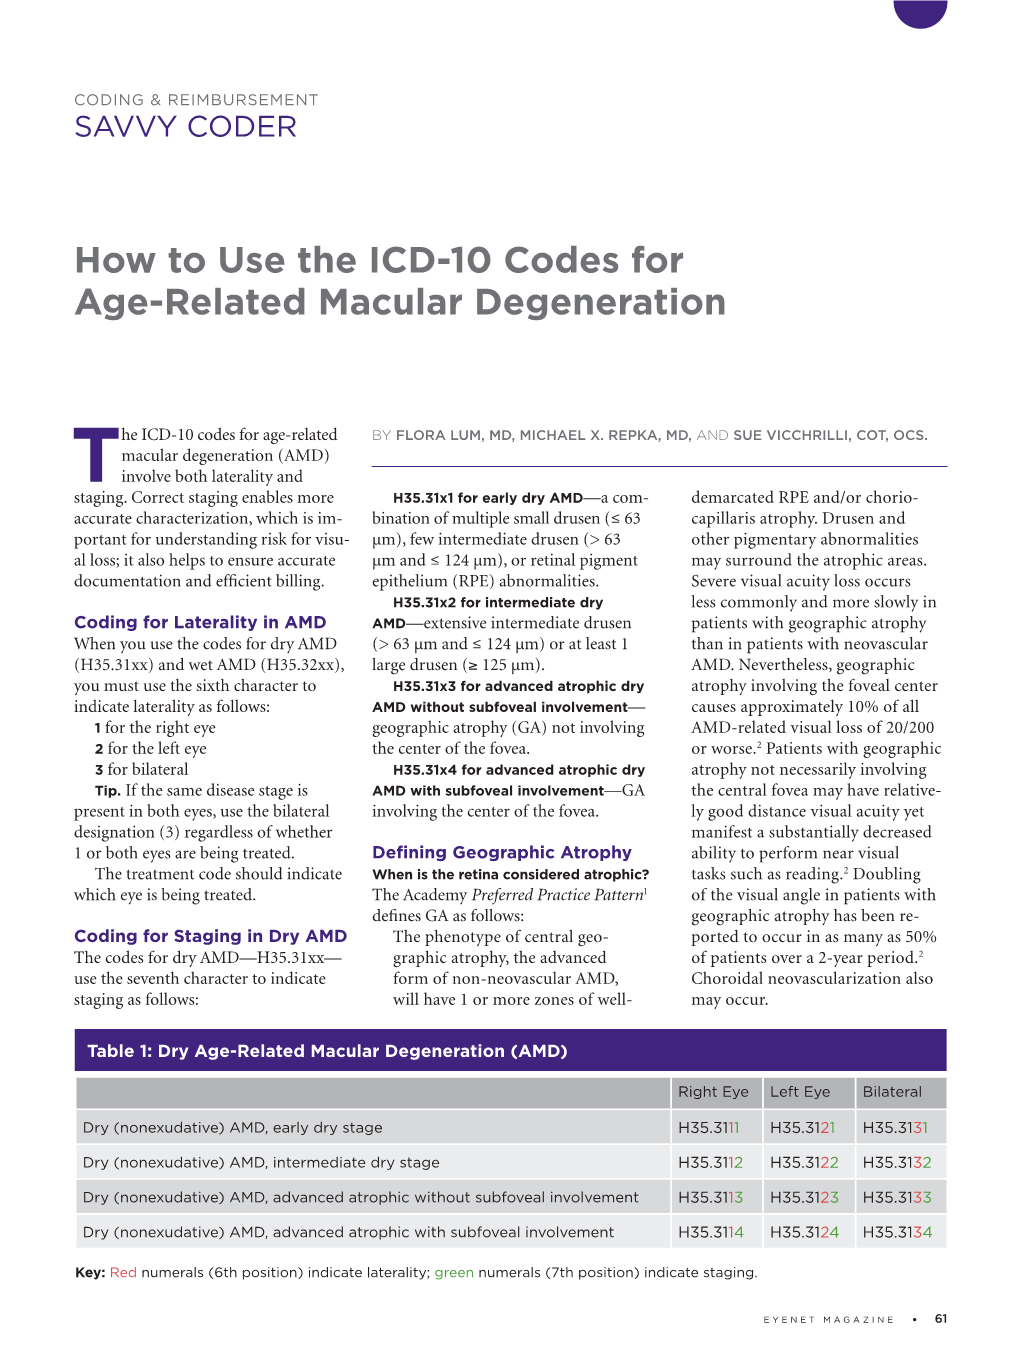 How to Use the ICD-10 Codes for Age-Related Macular Degeneration